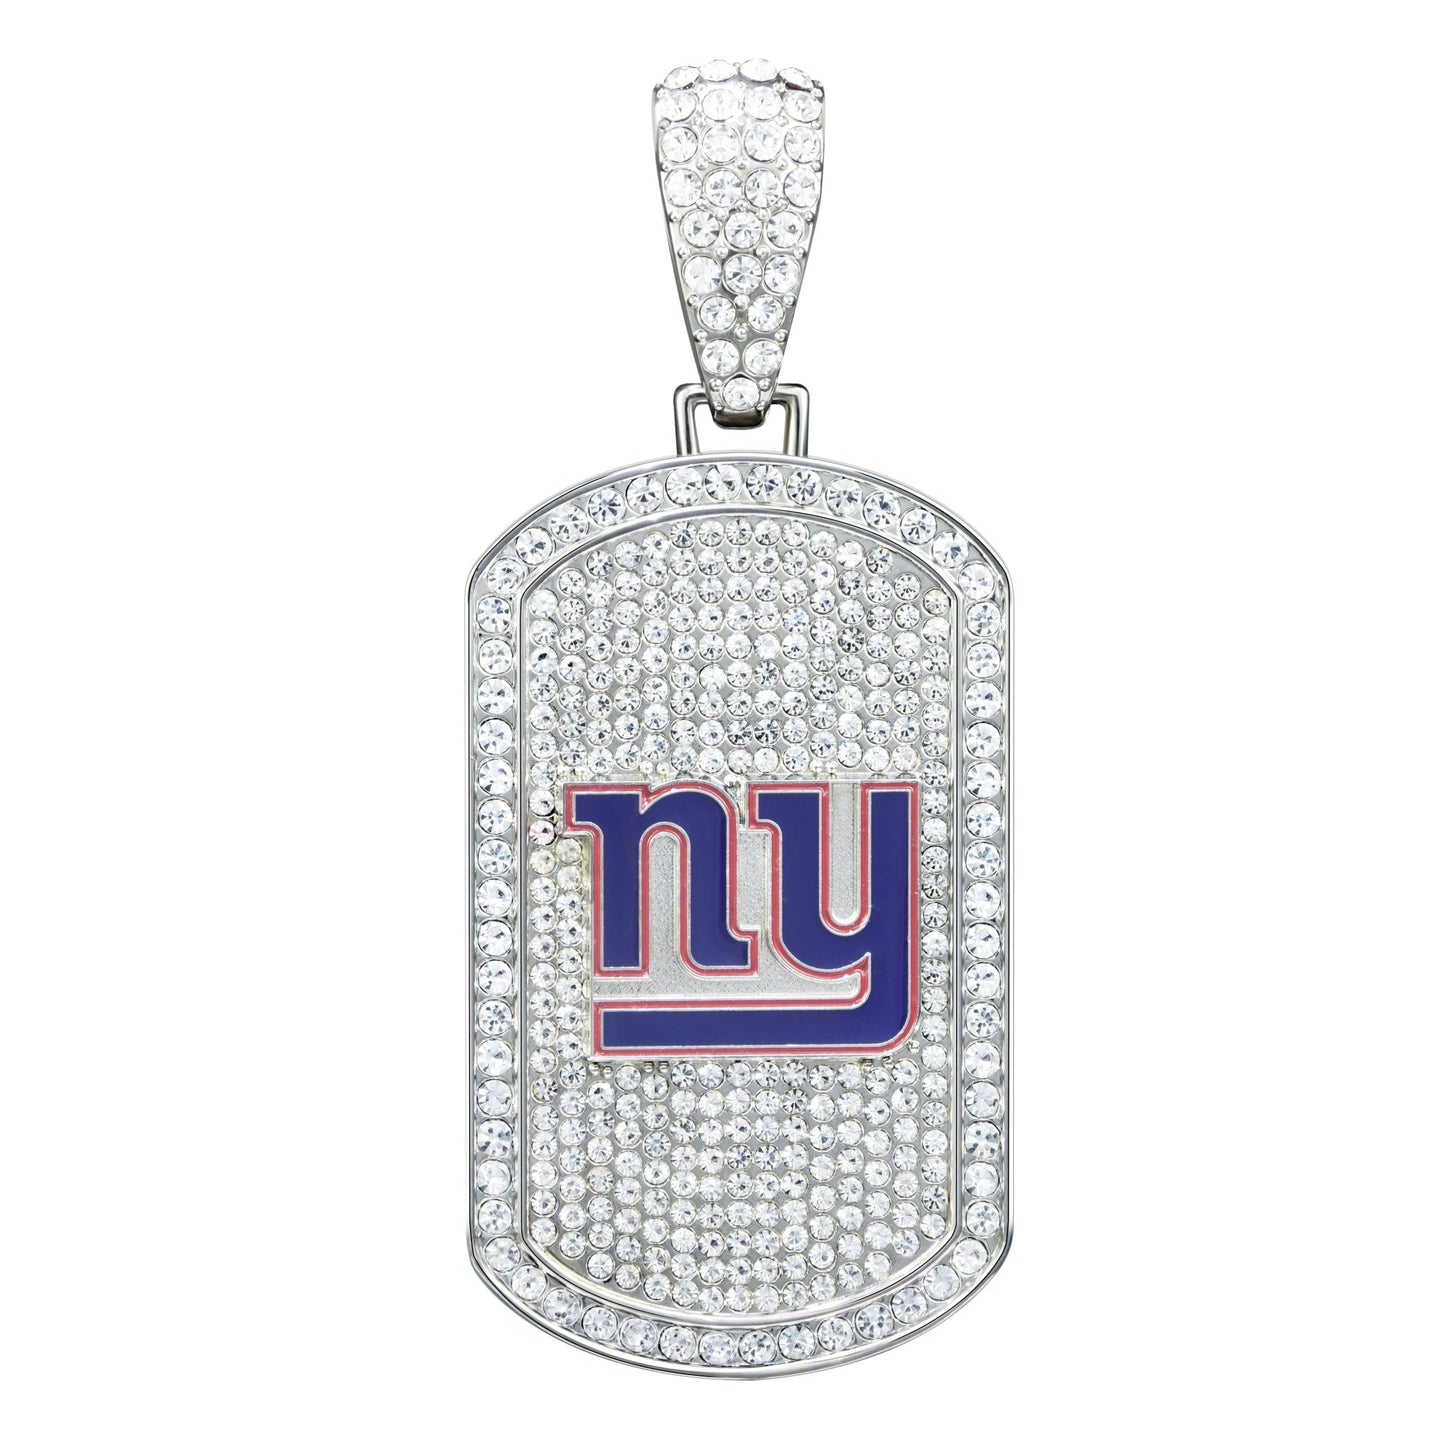 NFL Bling Dog Tag Necklace - Gamedays Gear - New York Giants